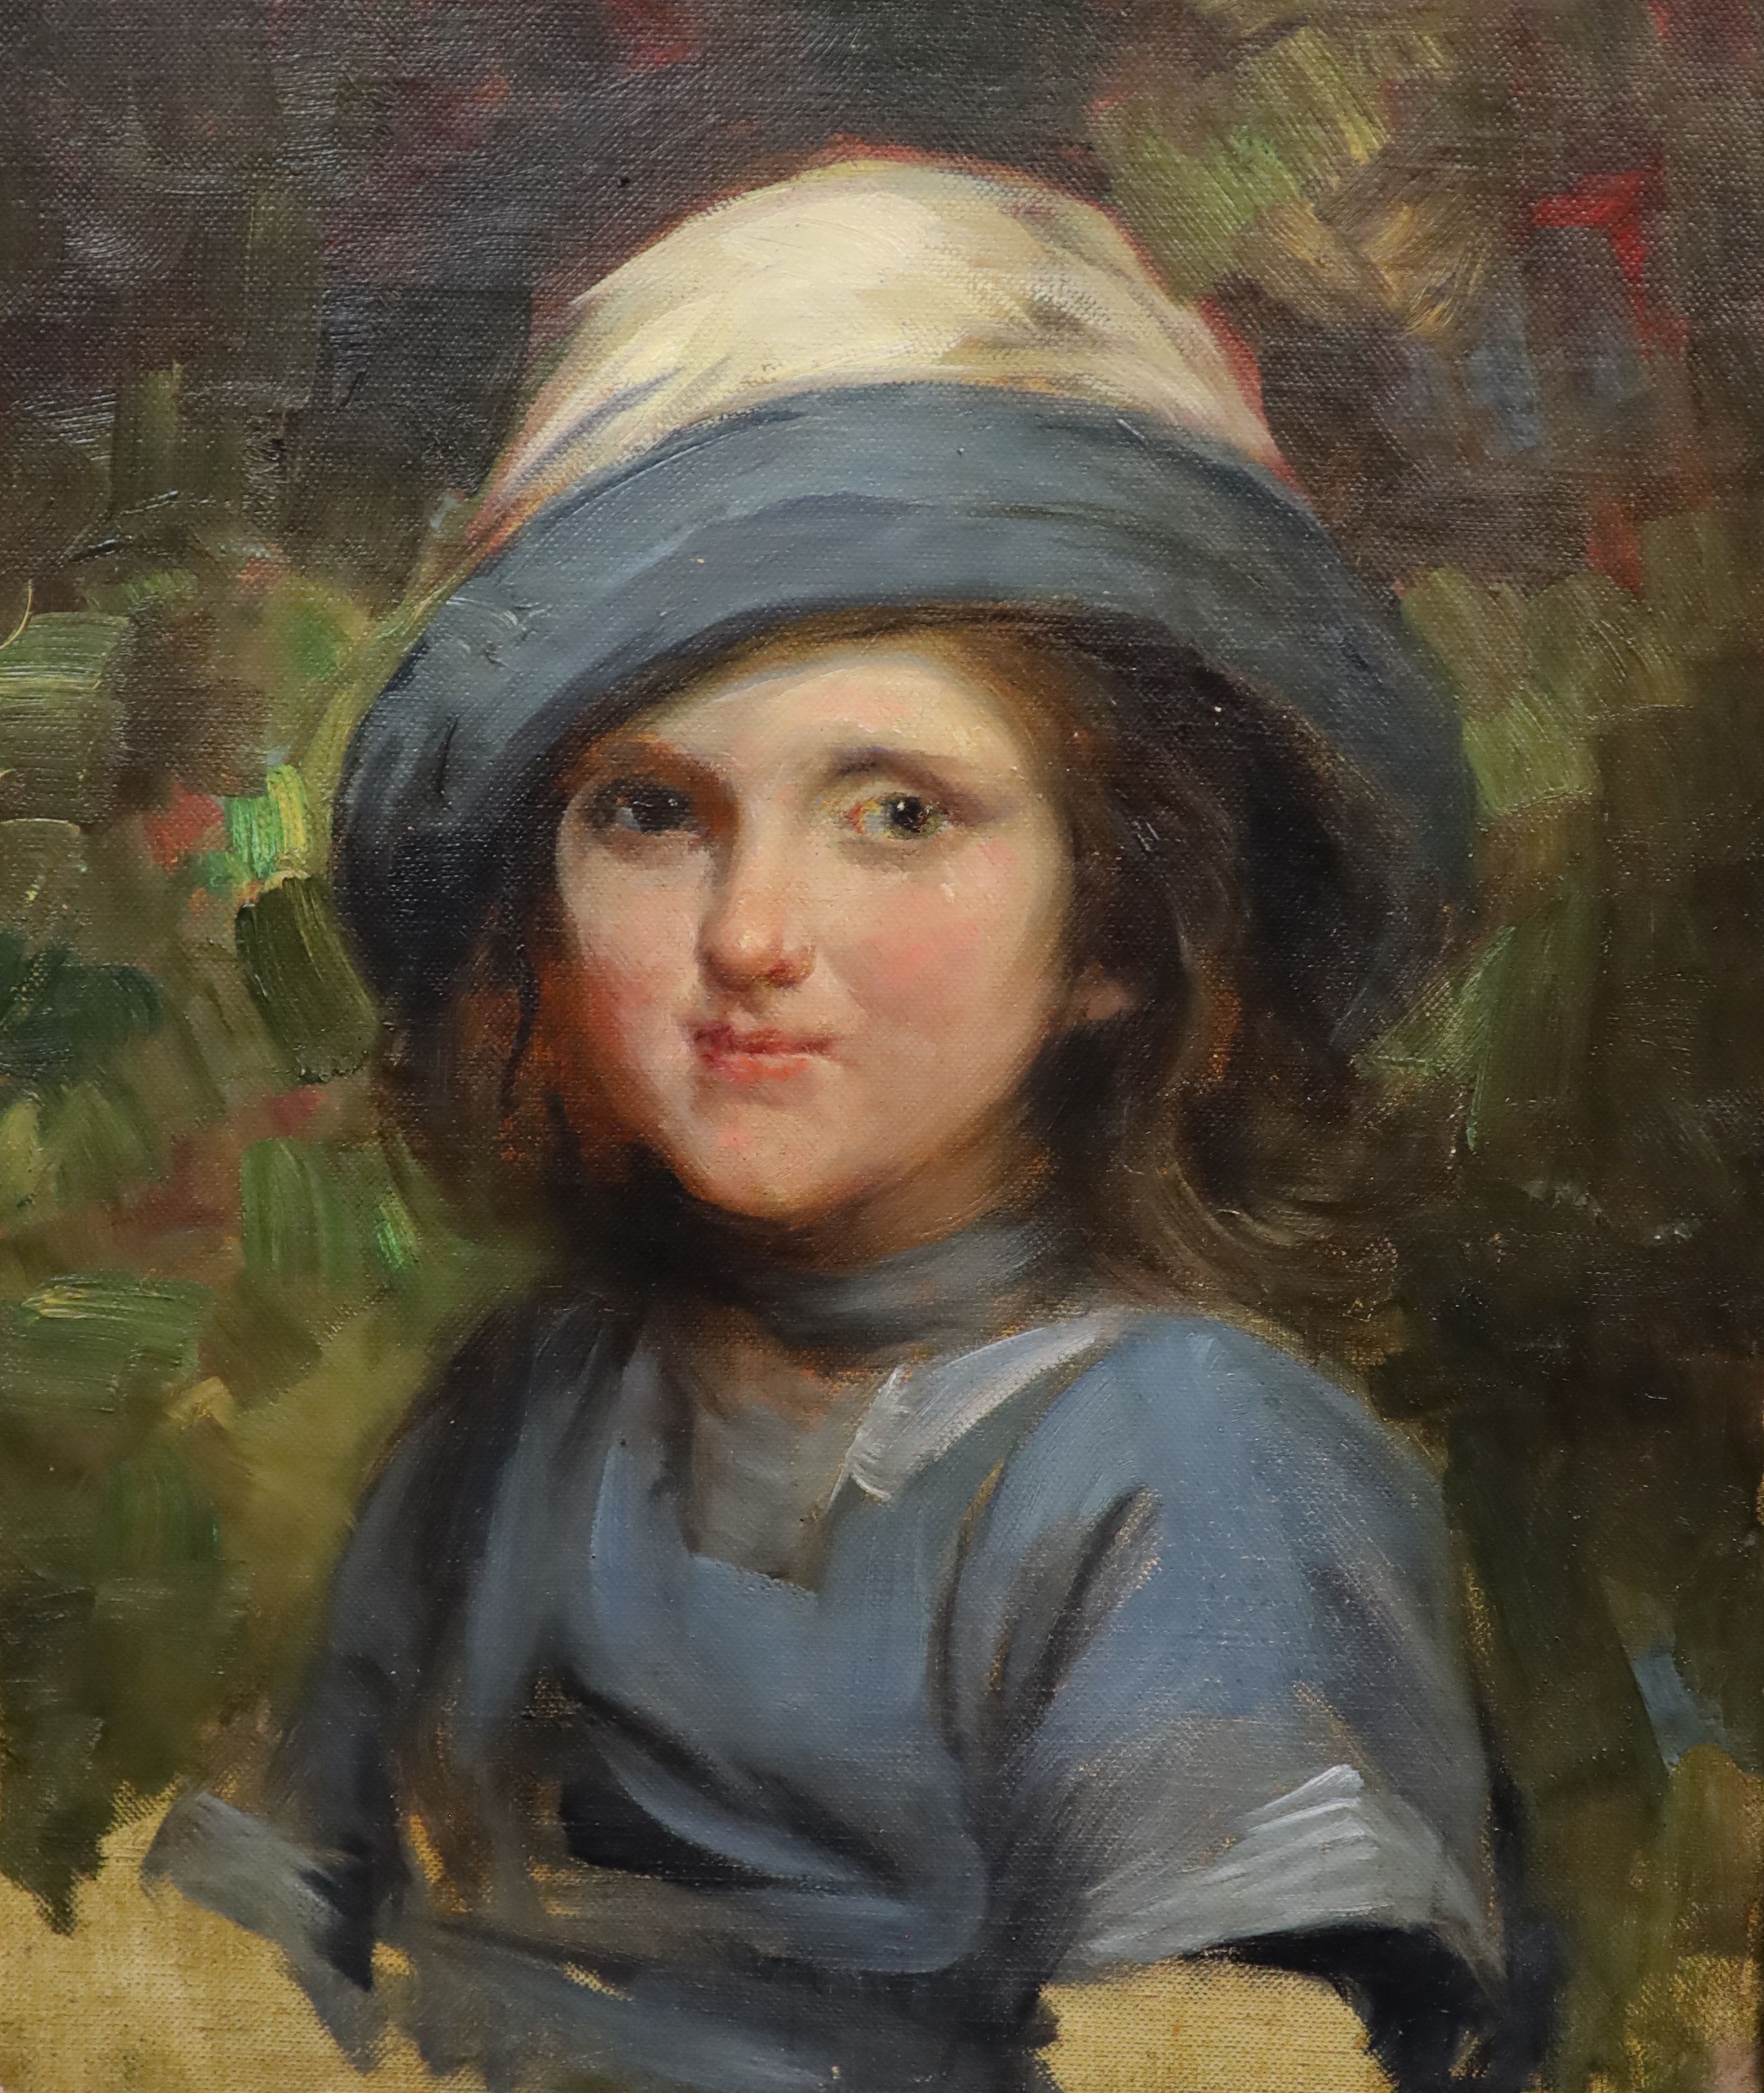 Attributed to Harold Harvey (1874-1941), Portrait of a girl wearing a blue hat, oil on canvas, 50 x 40cm